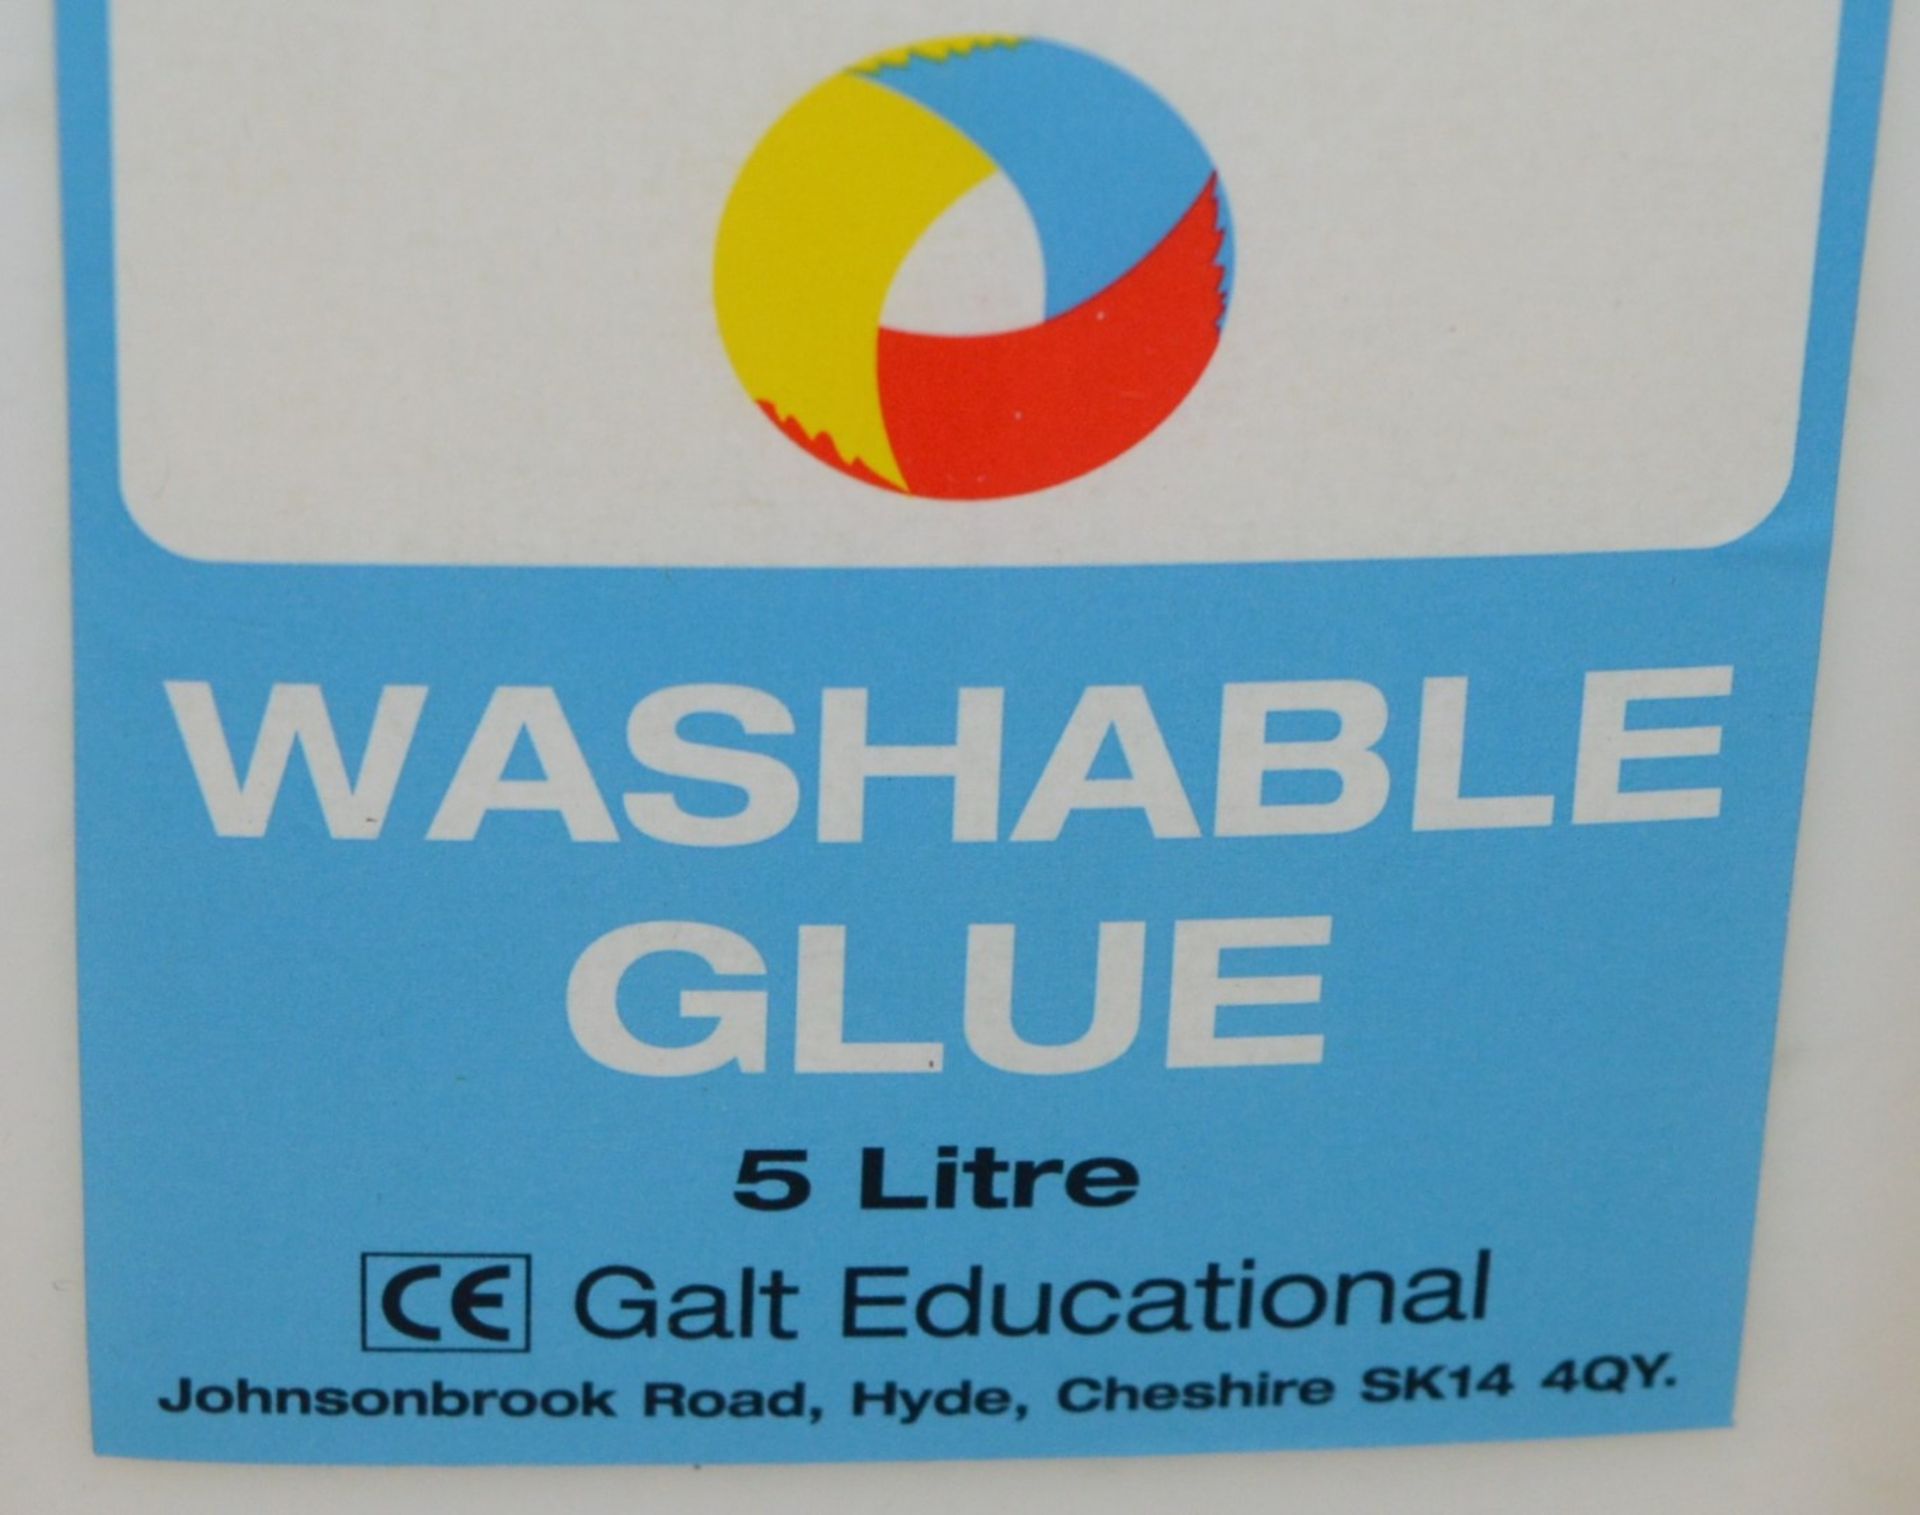 4 x Foundation Range Washable Glue - 5 Litre Containers - Brand New Stock - CL185 - Ref DRT0025 - - Image 4 of 4